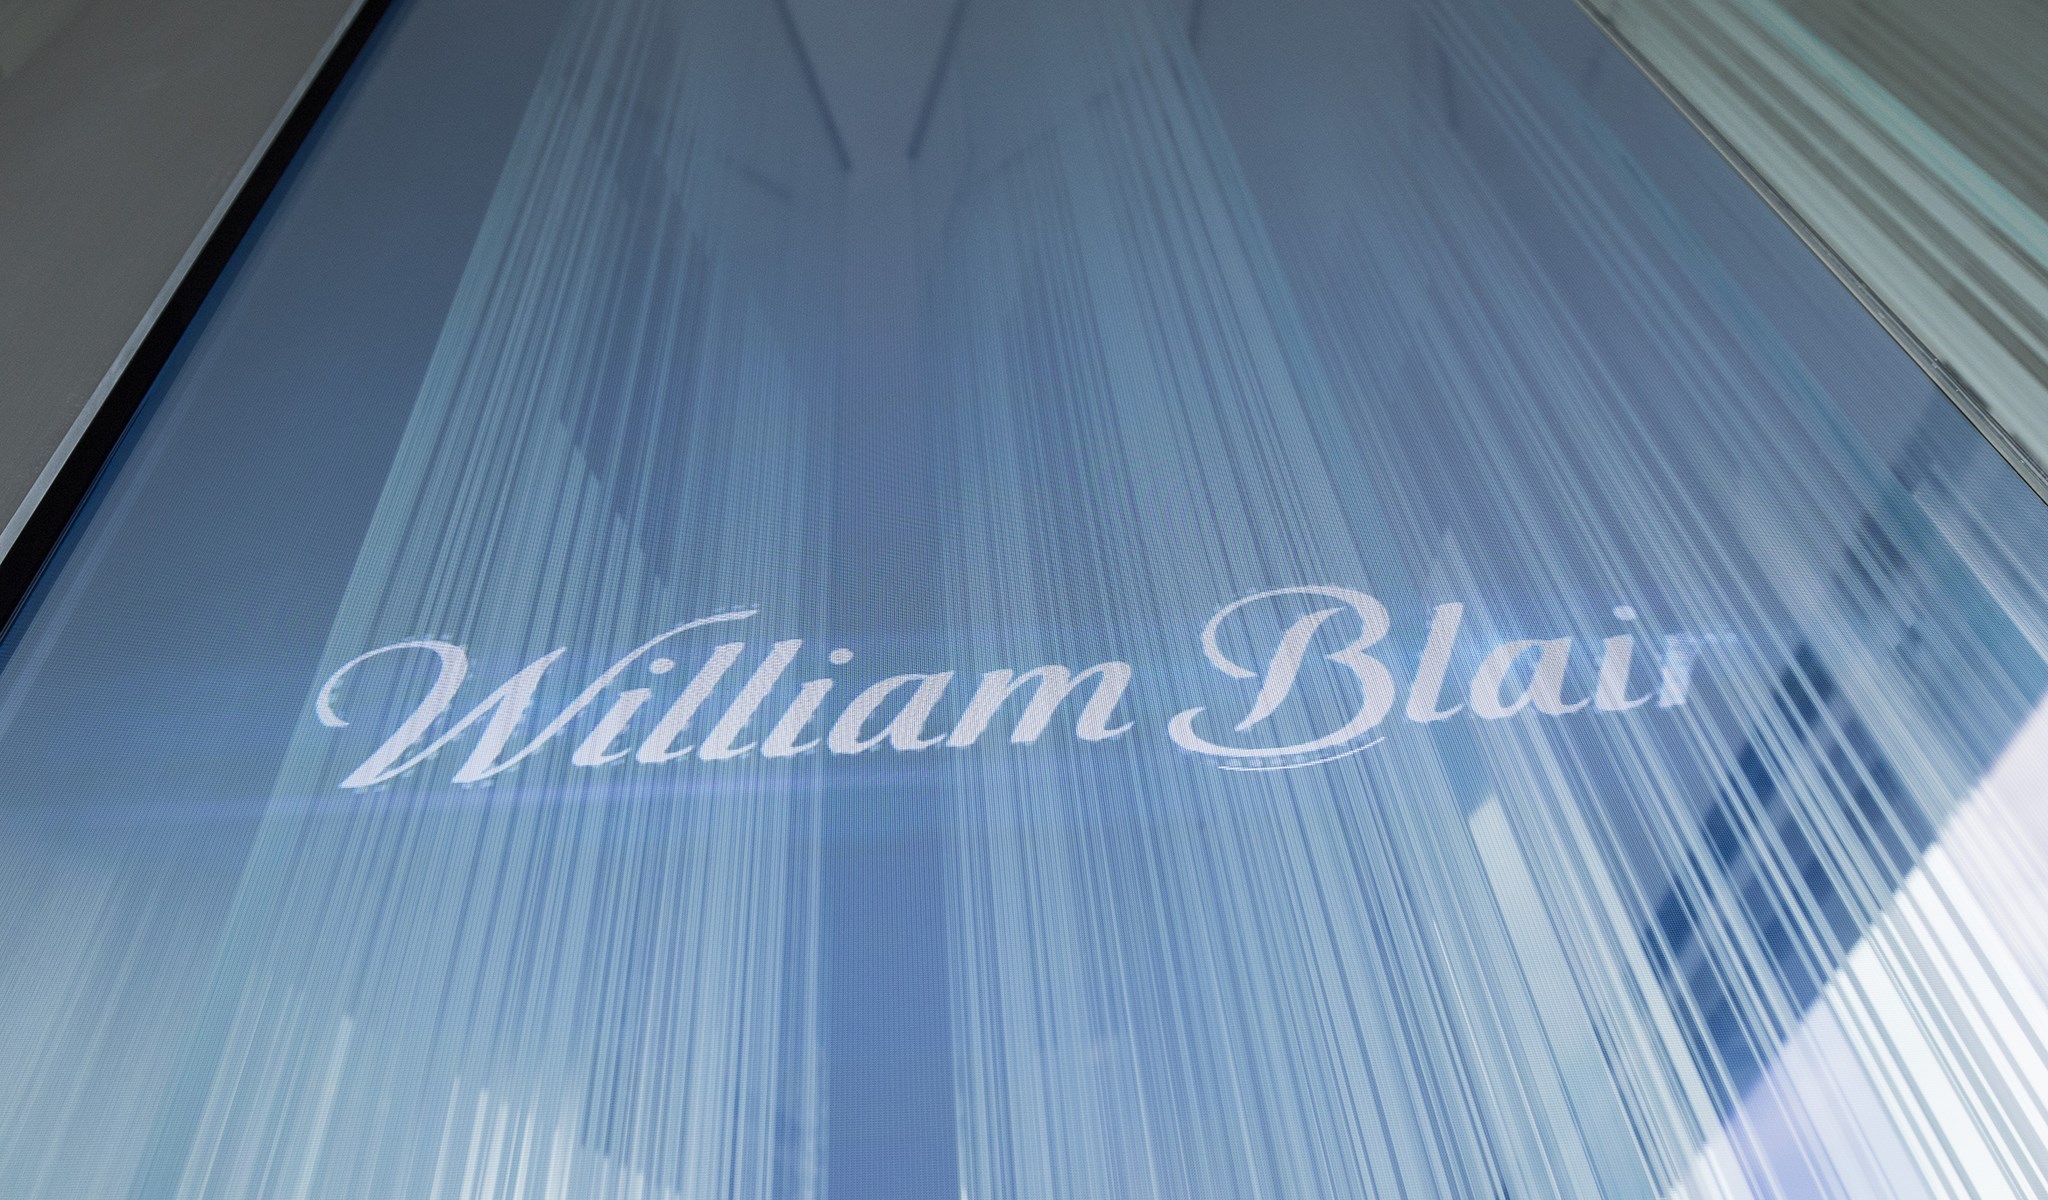 William Blair logo etched on a glass wall